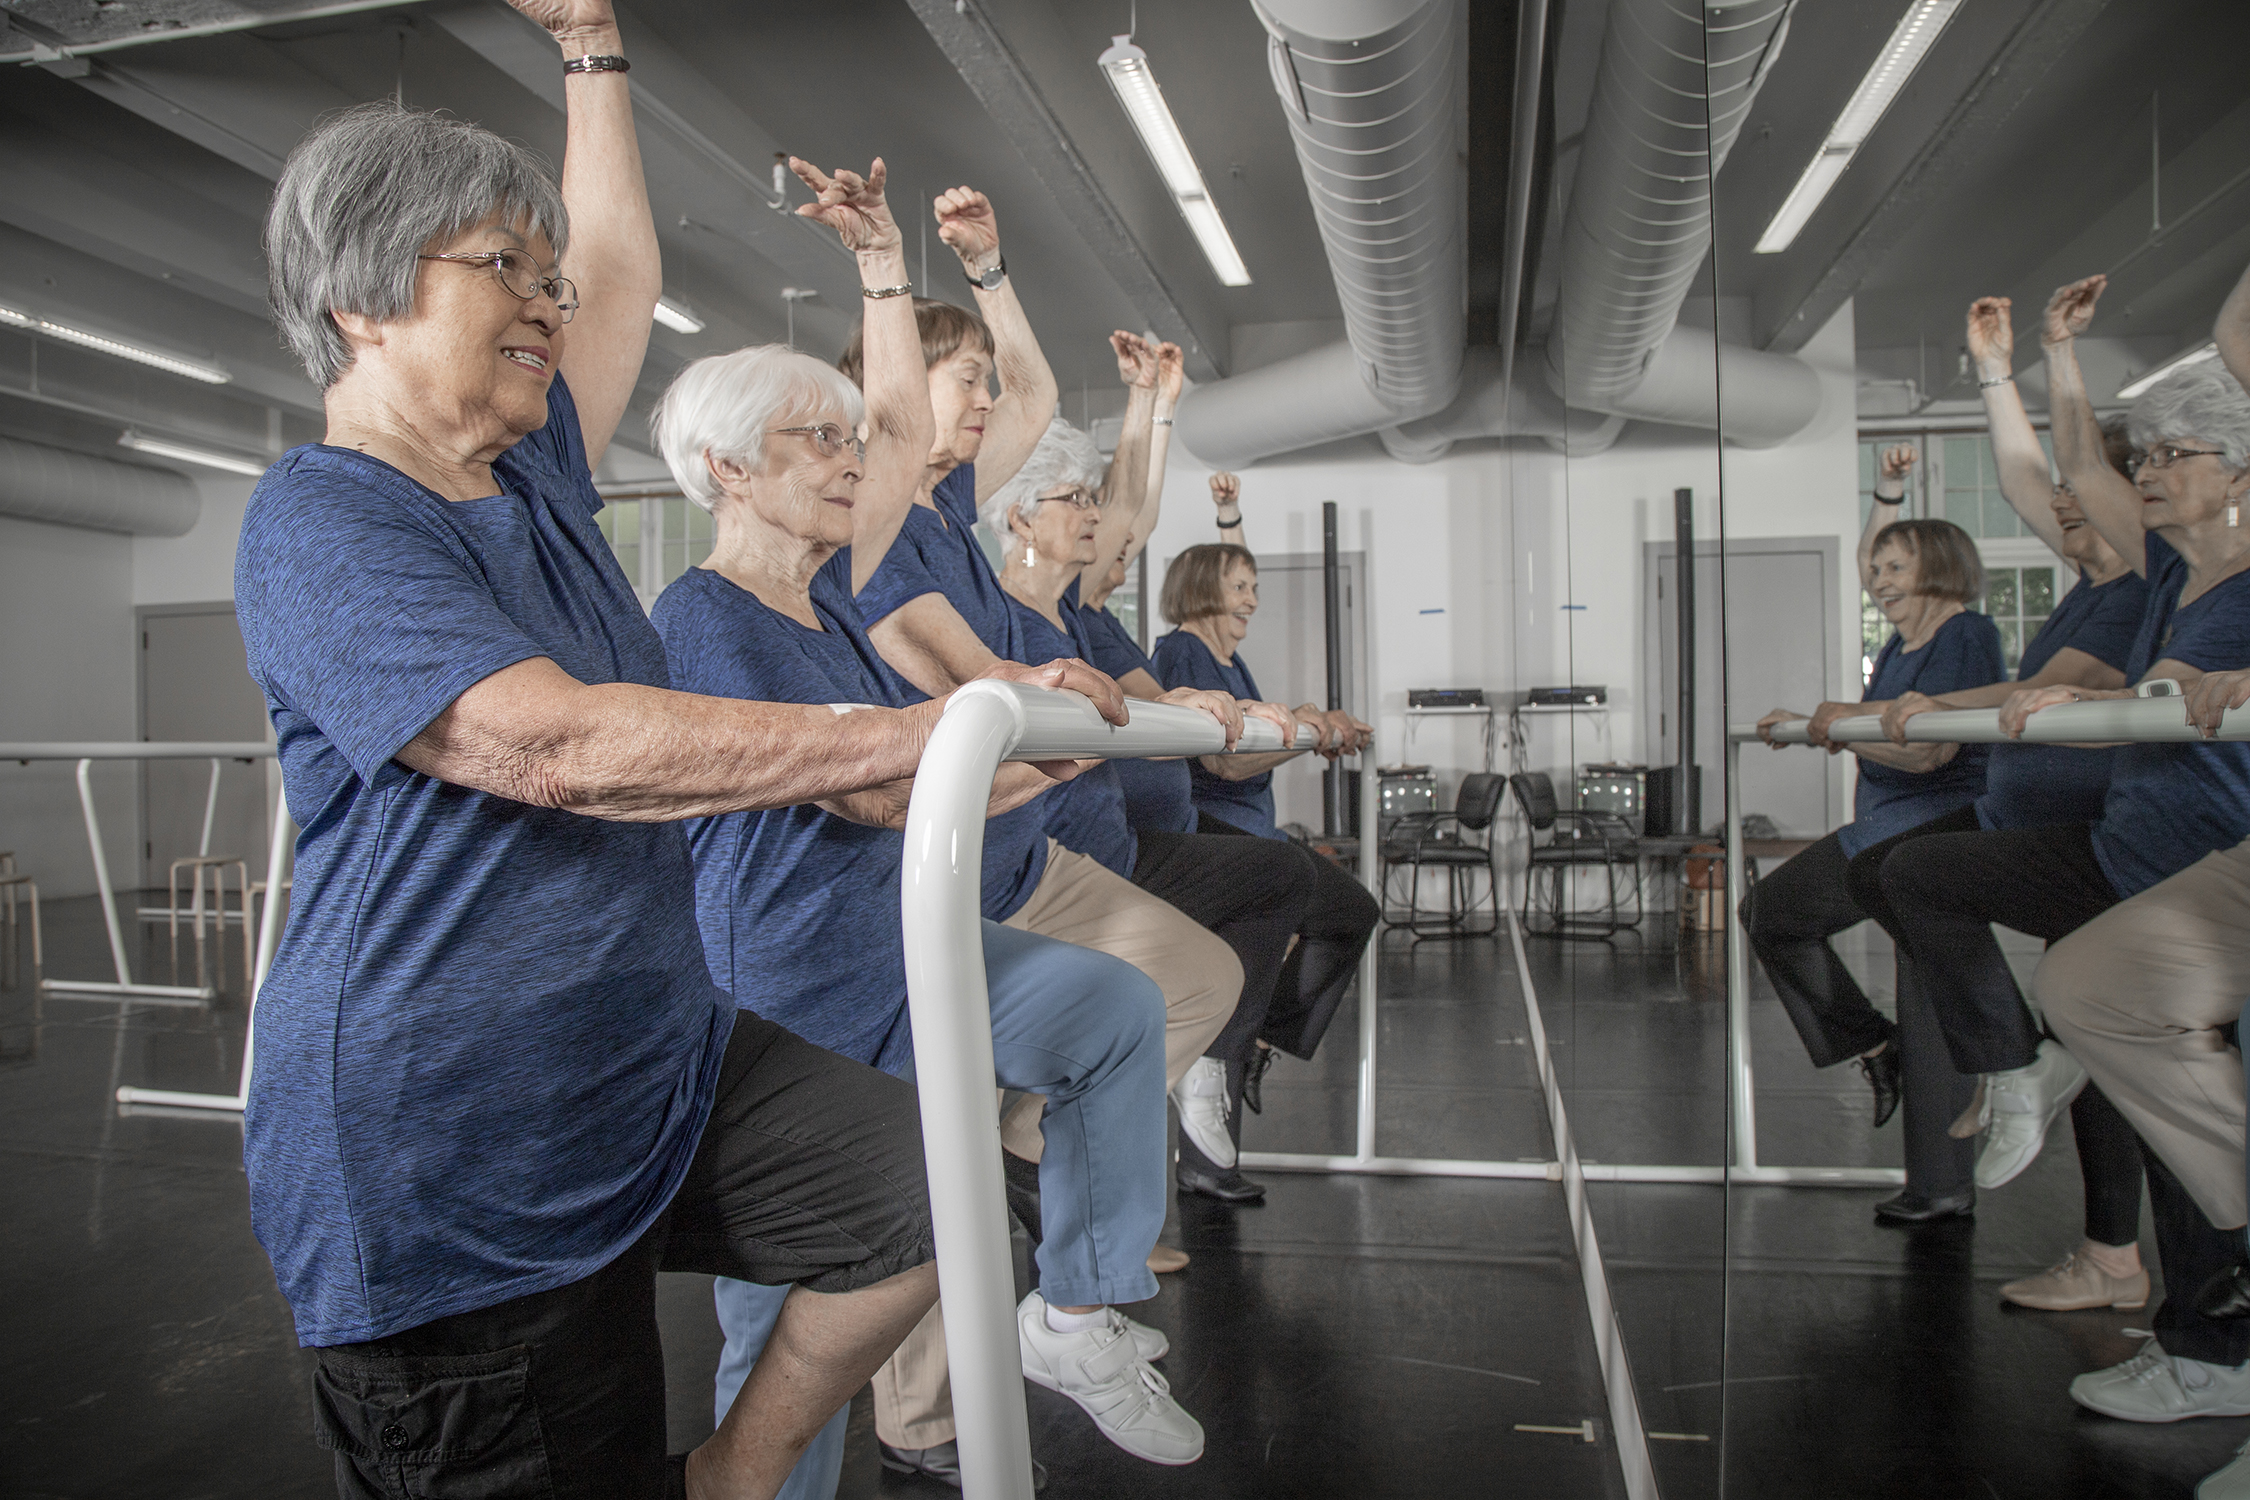 Eskaton is committed to increase fall awareness and reduce fall risk by providing the region with educational resources. Eskaton’s theme for fall prevention month is “Movement and Balance.” Workshops, educational forums, and classes will focus on lifestyle modifications and ways to increase physical activity for a more active daily routine. The curriculum is designed to empower older adults to stay active and independent both in their homes and in senior living communities.